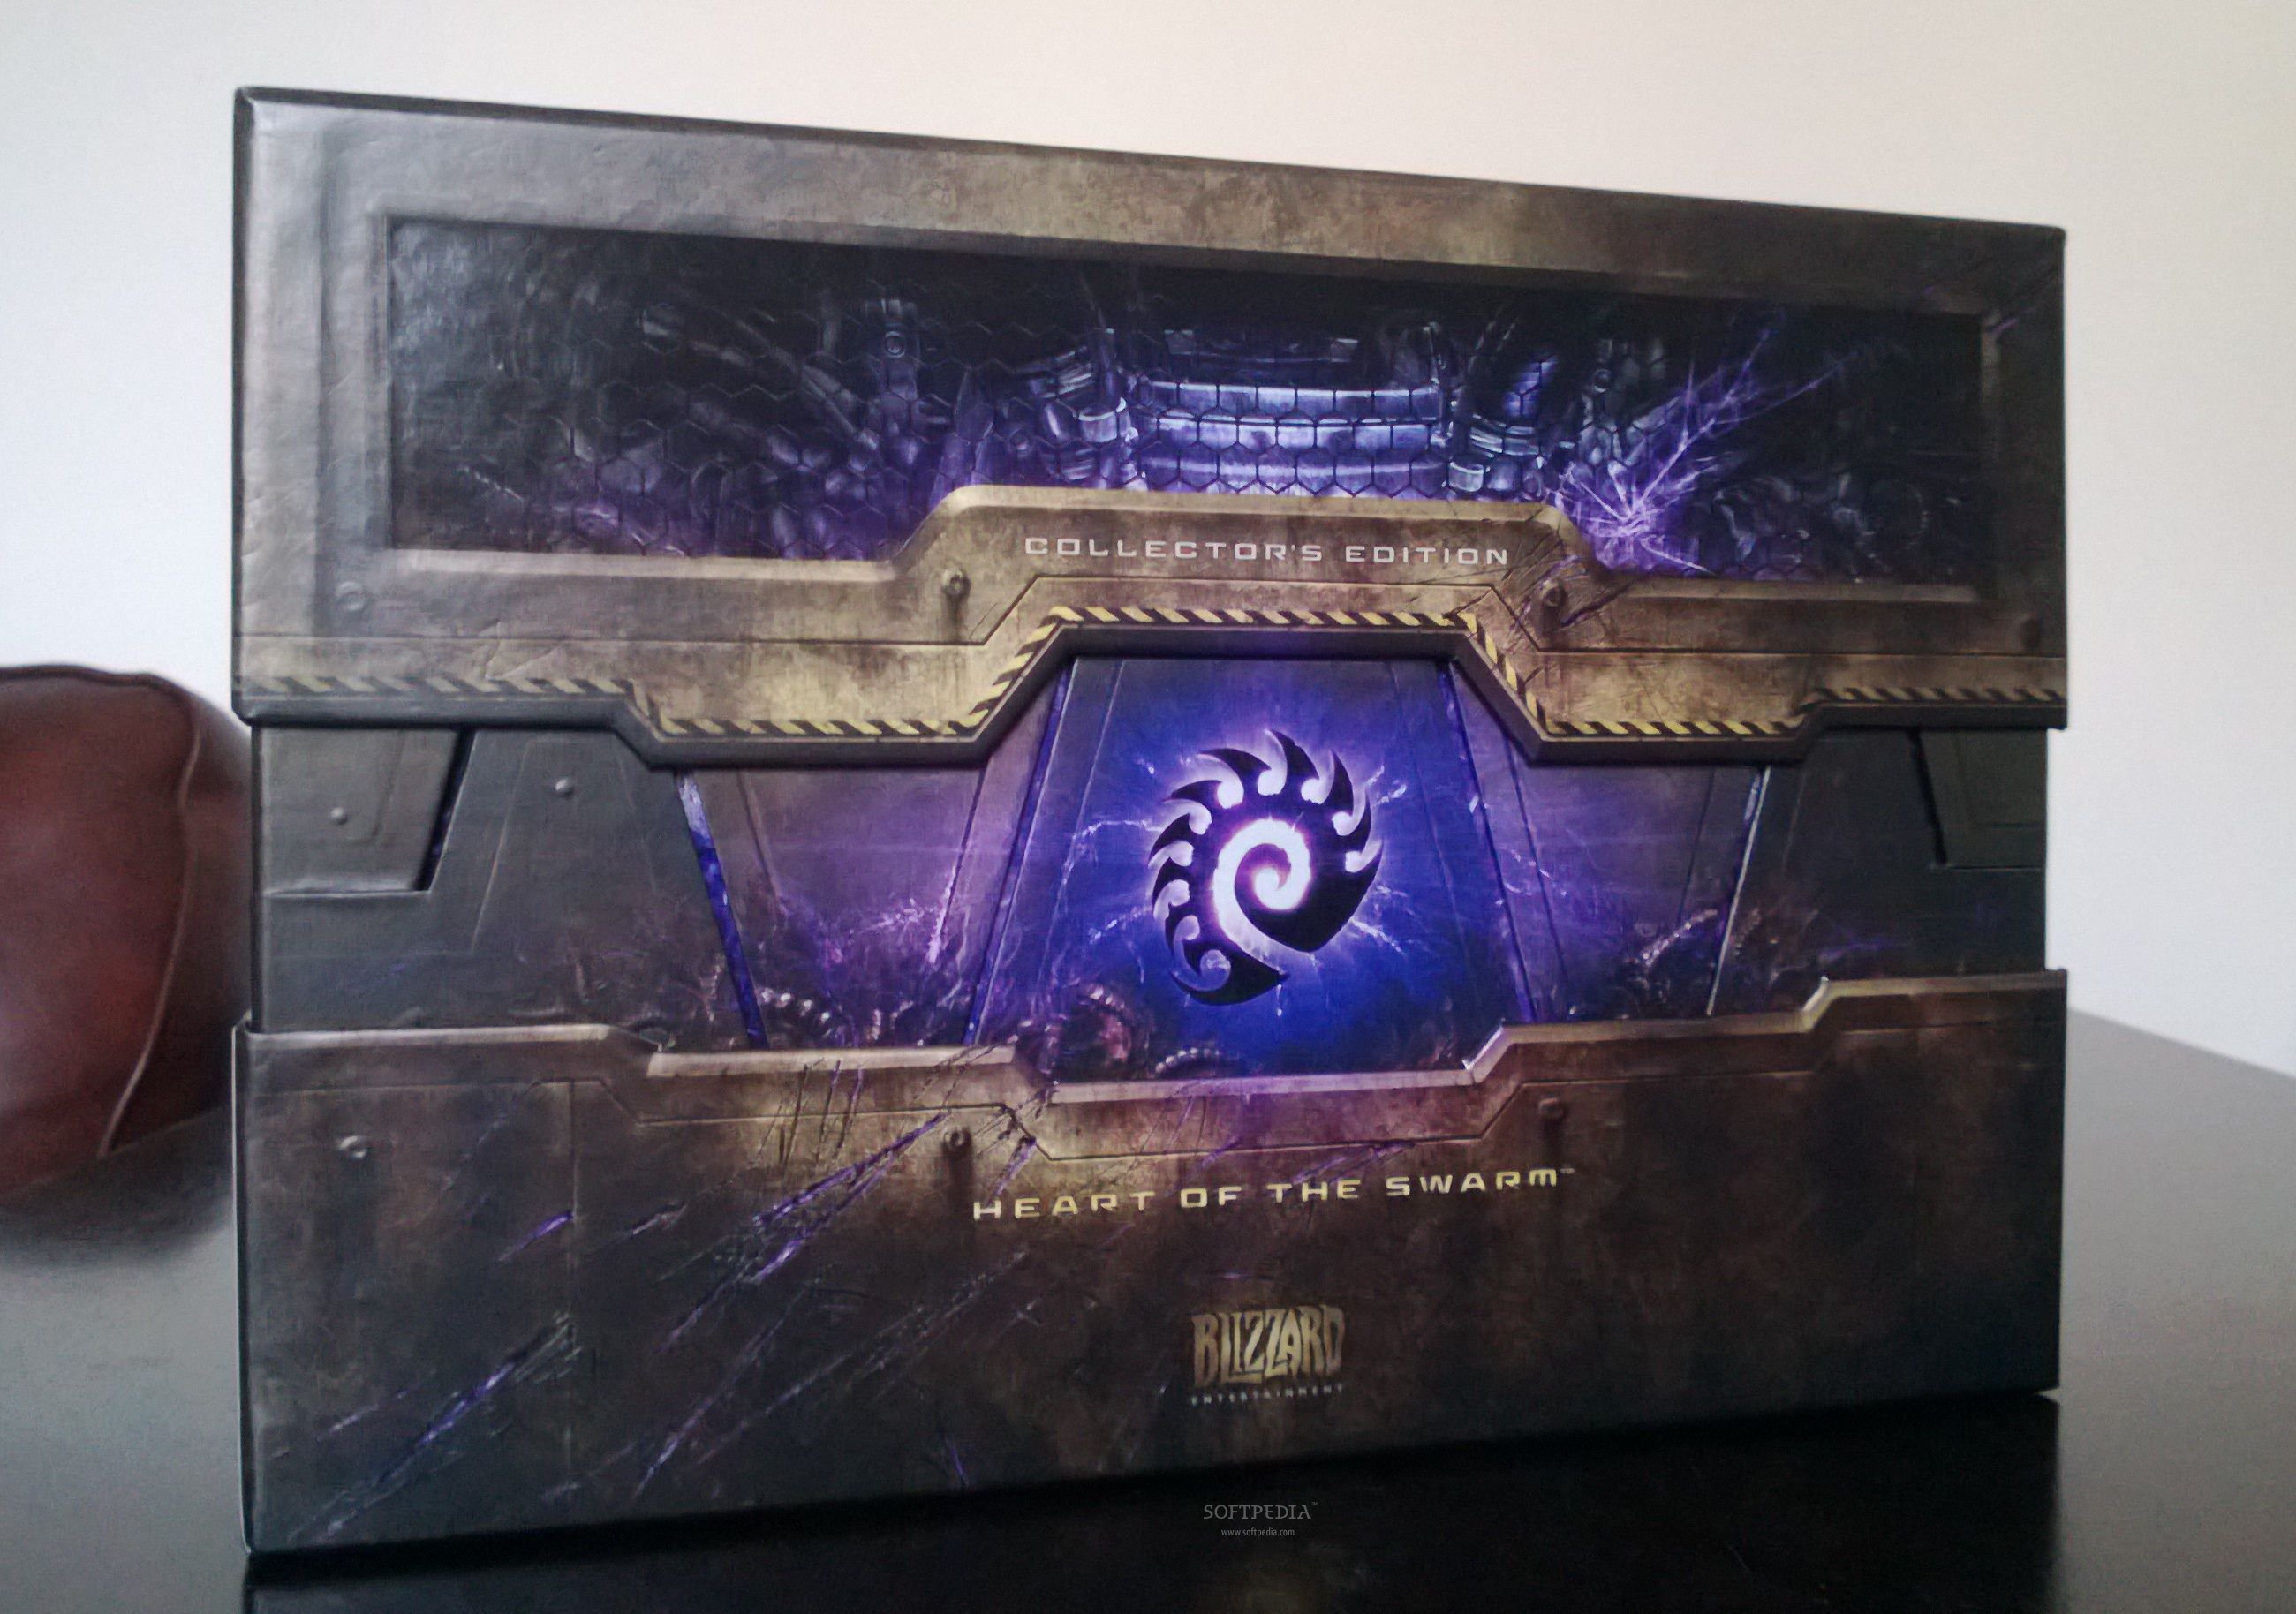 http://i1-news.softpedia-static.com/images/news2/StarCraft-II-Heart-of-the-Swarm-Collector-s-Edition-Unboxing-3.jpg